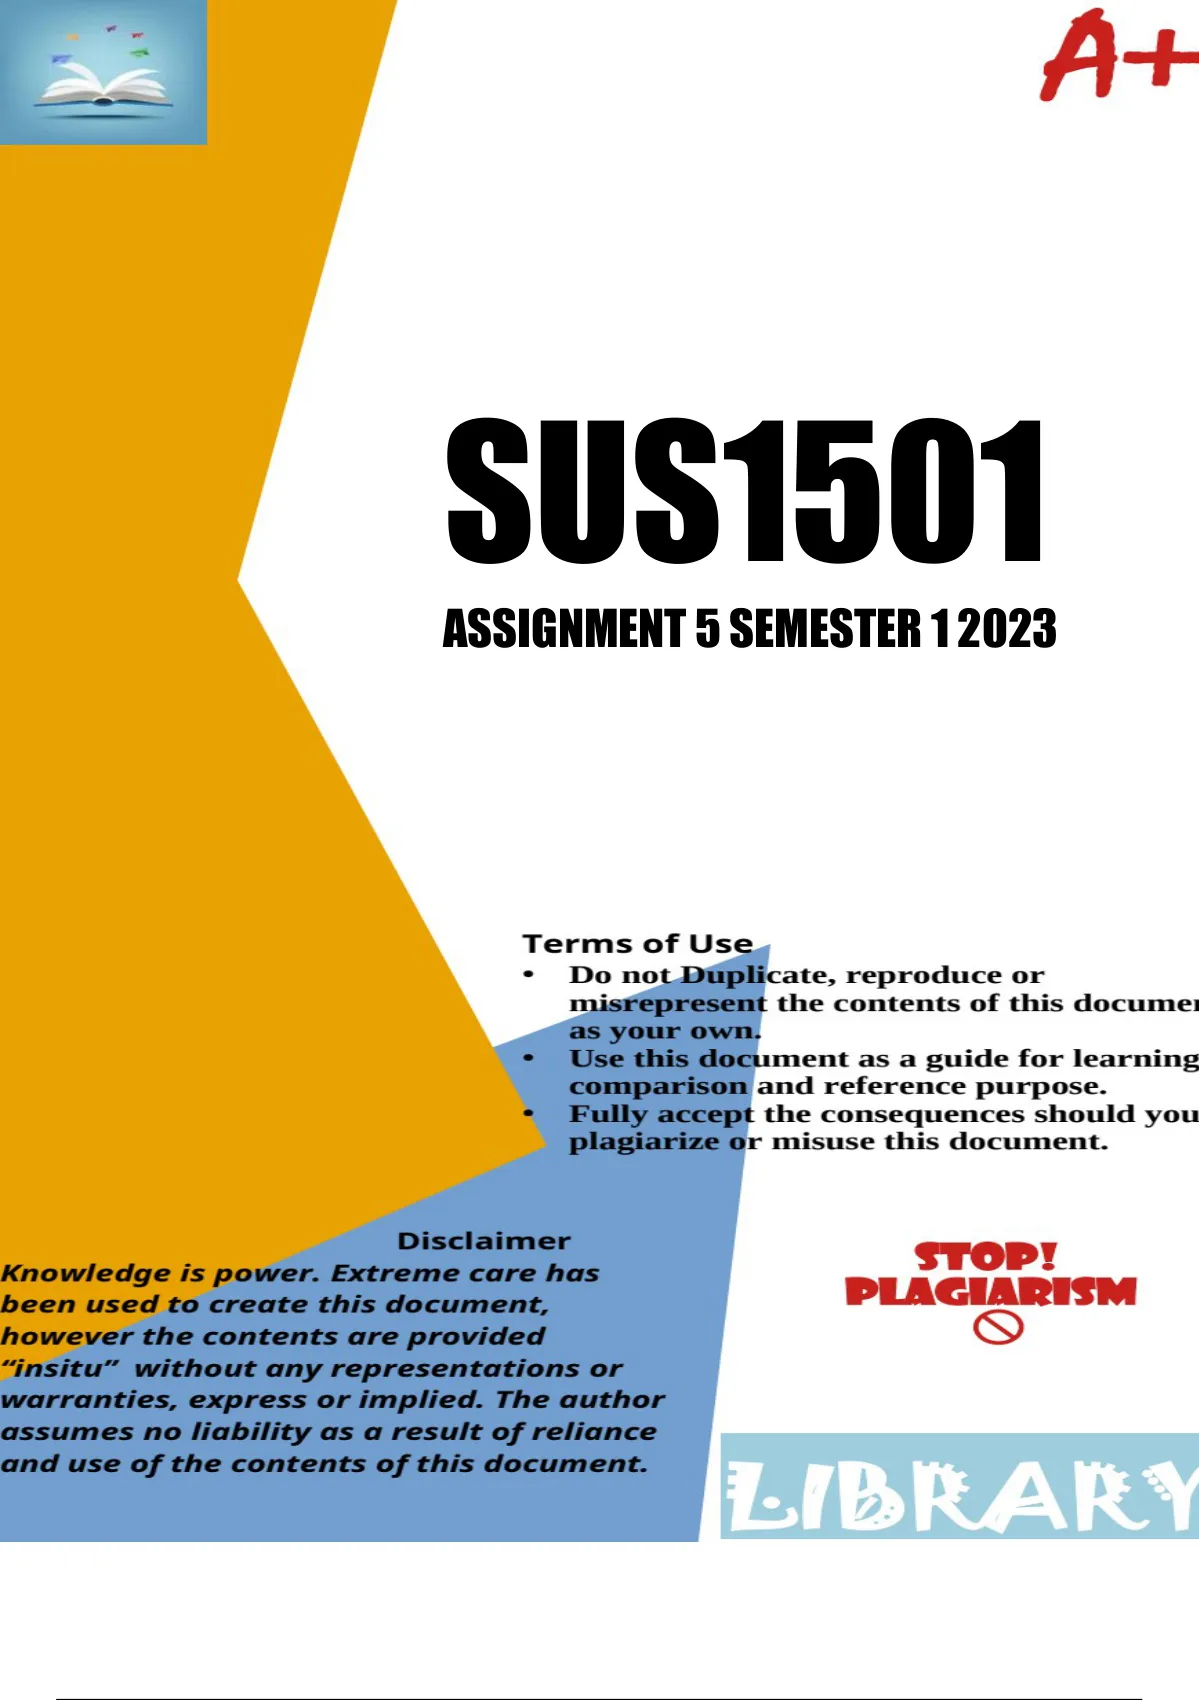 assignment 5 sus1501 pdf free download